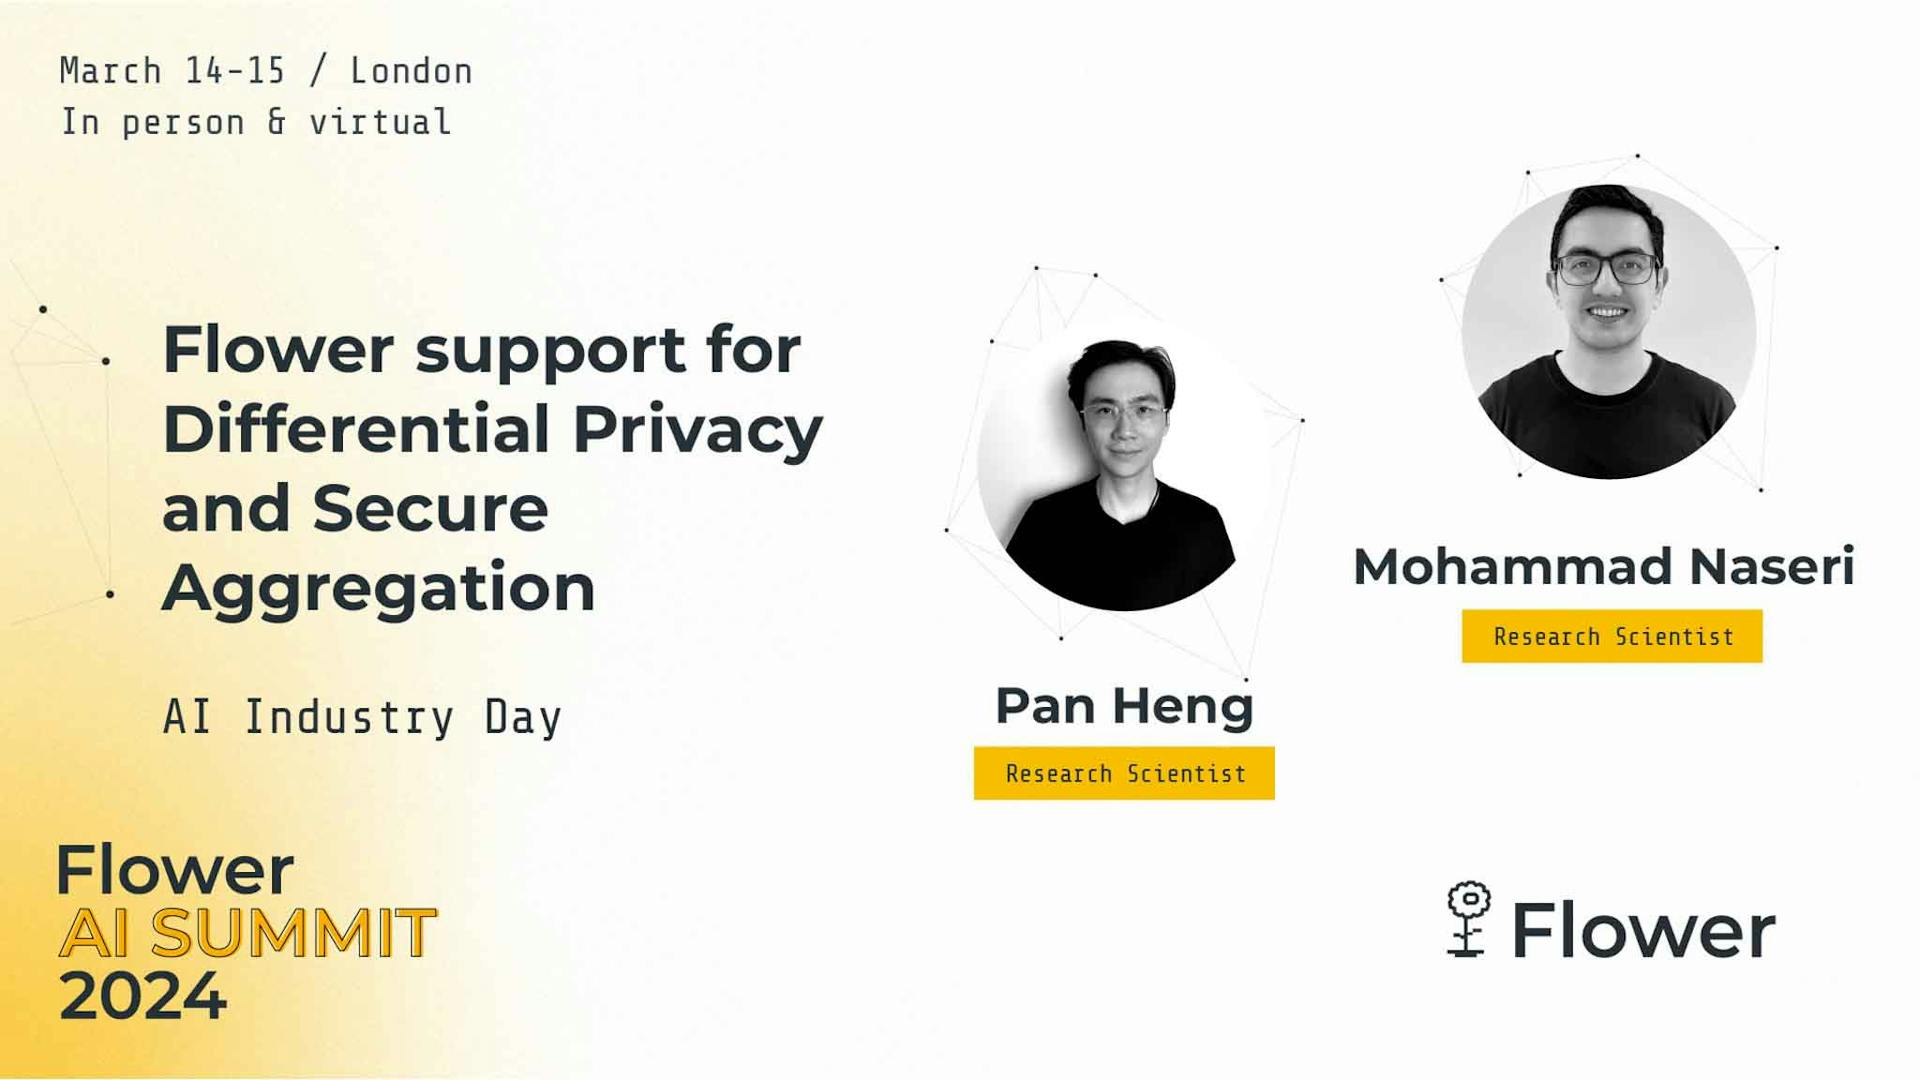 Flower support for Differential Privacy and Secure Aggregation, by Pan Heng and Mohammad Naseri